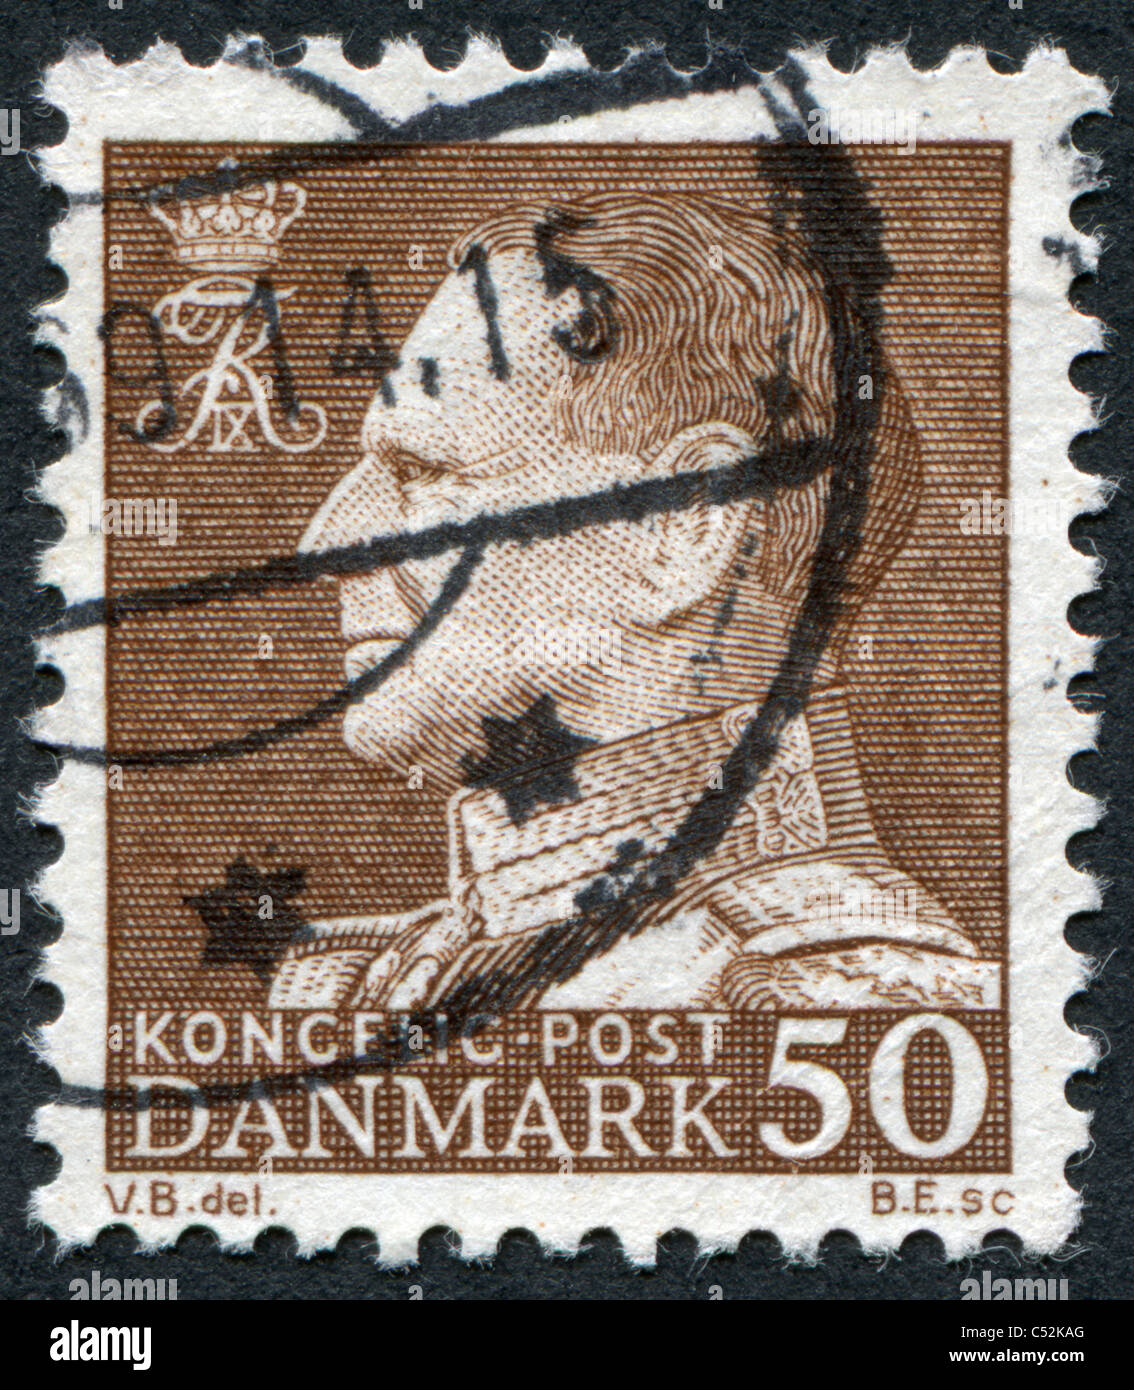 DENMARK 1967: A stamp printed in the Denmark, depicts King Frederick IX Stock Photo